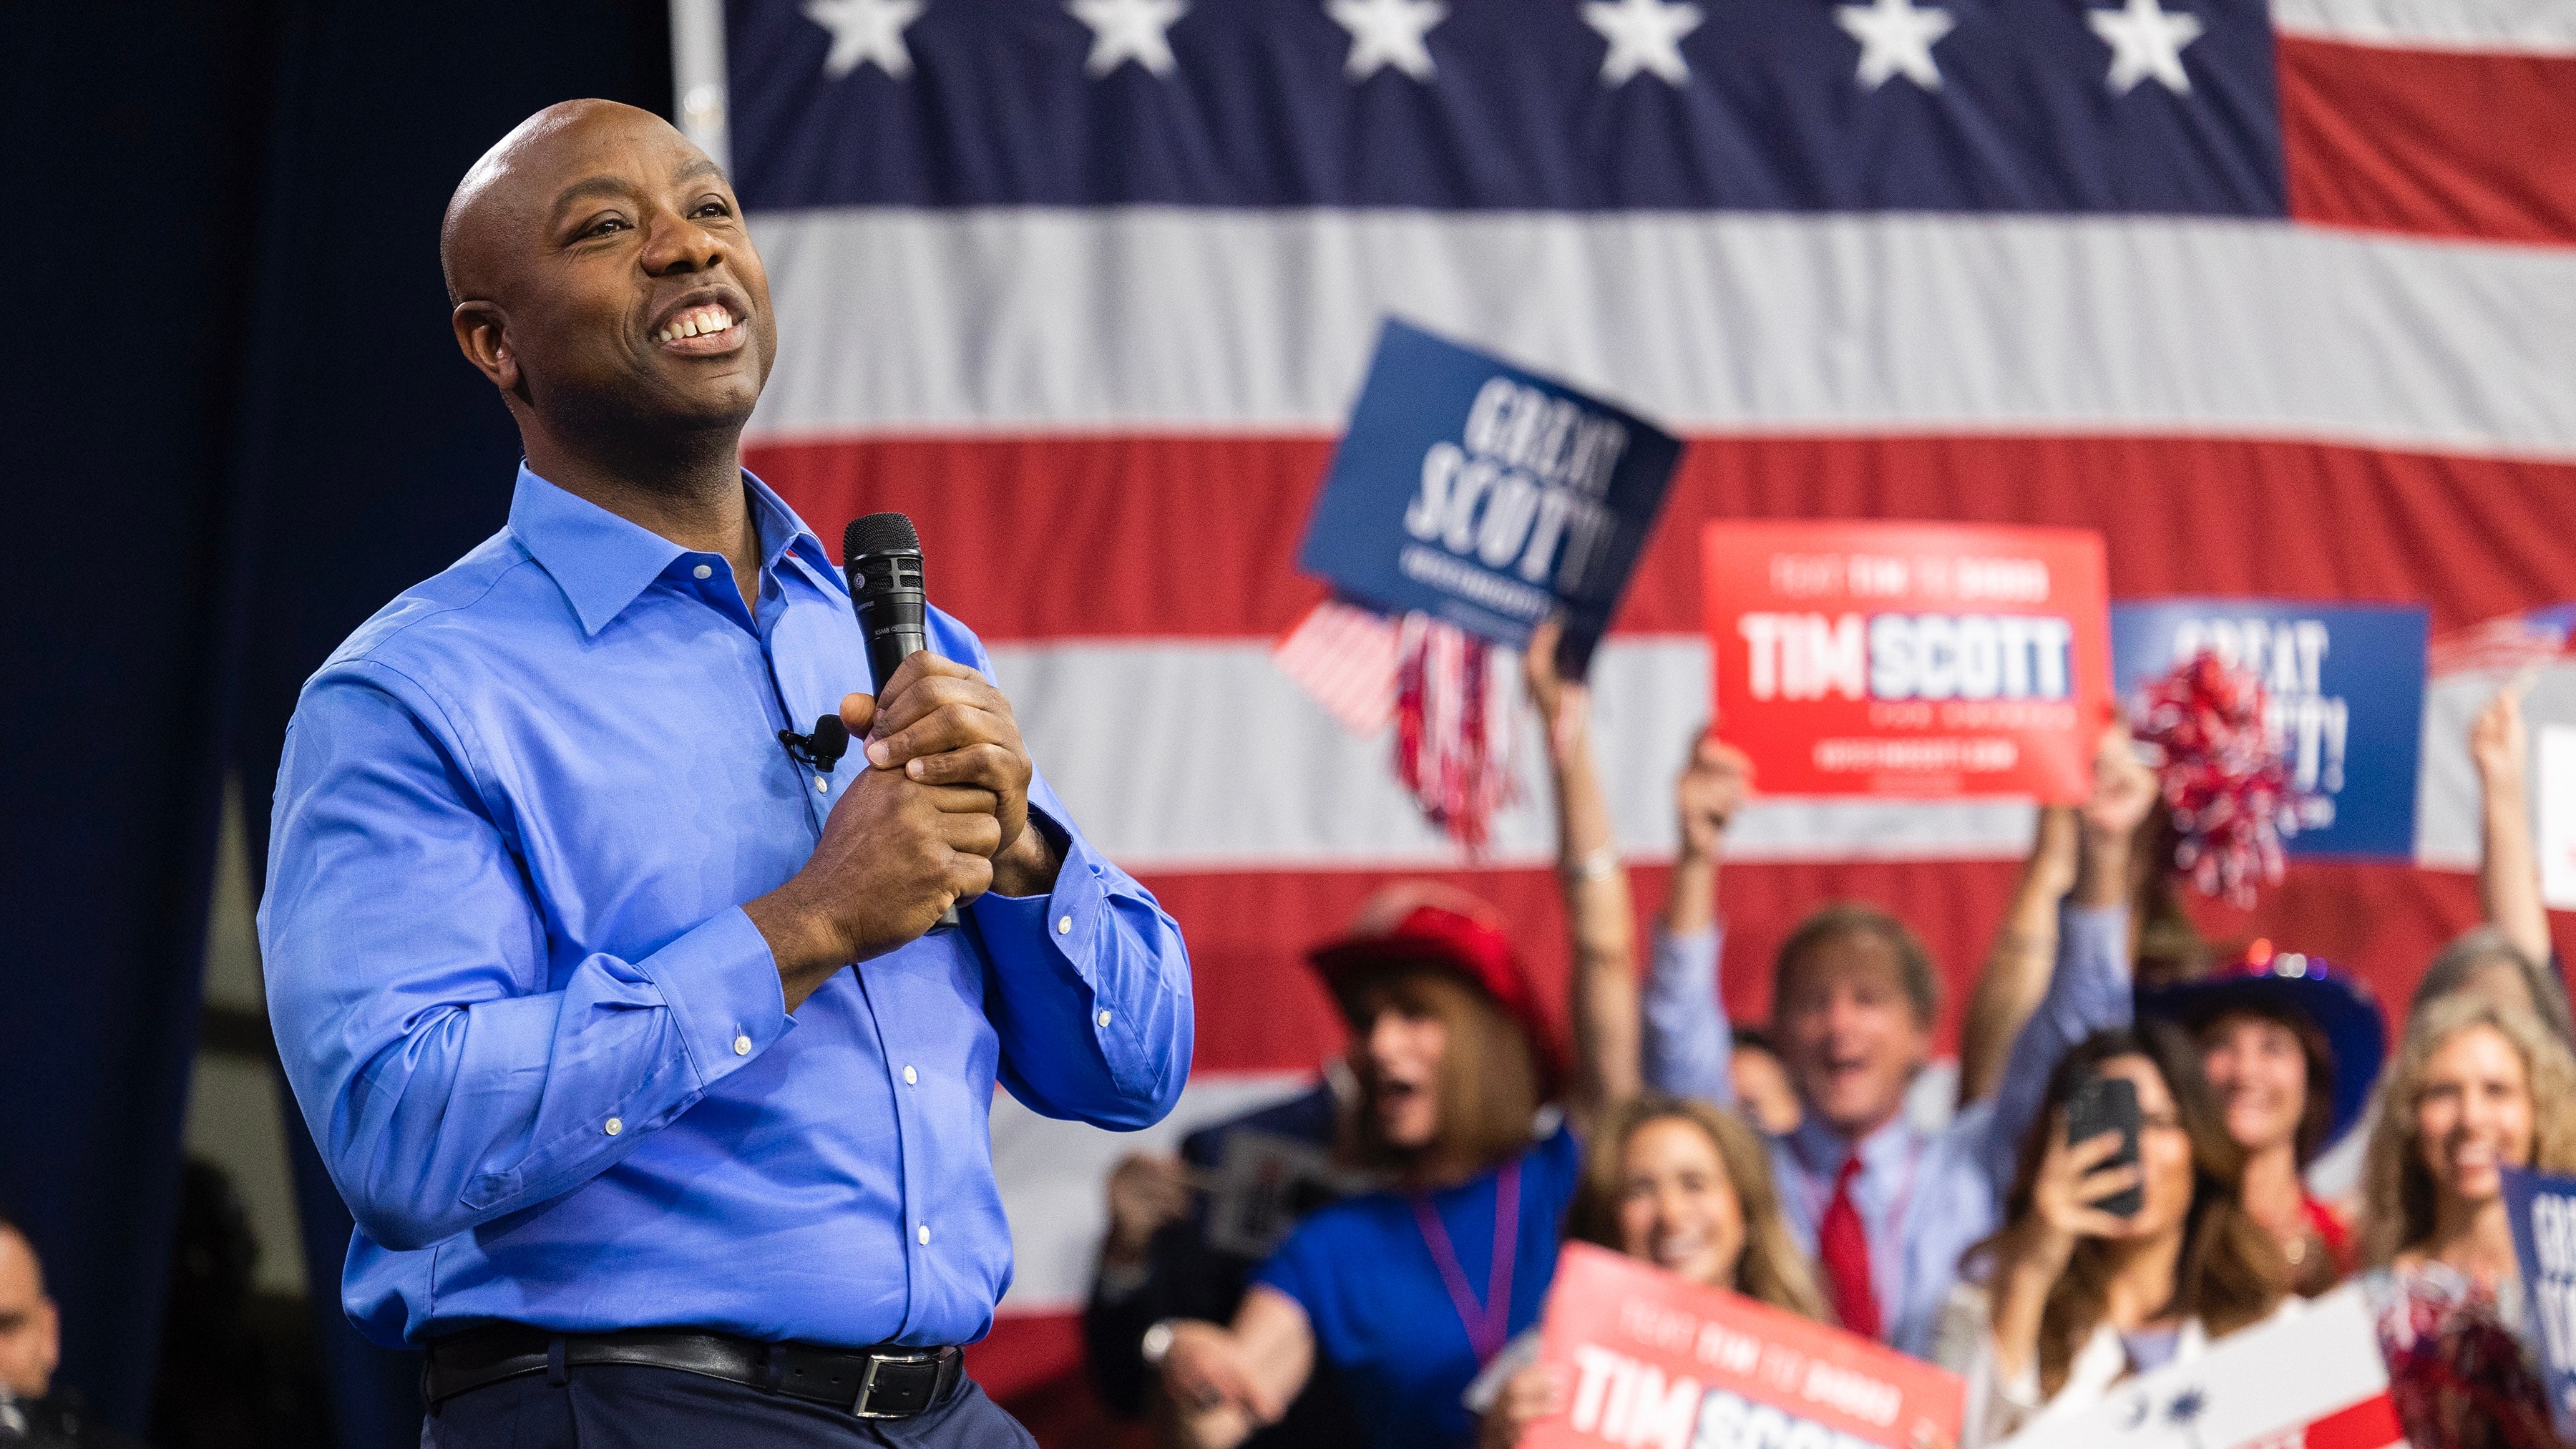 The Tim Scott candidacy: Upbeat, inspiring, and very unlikely to win